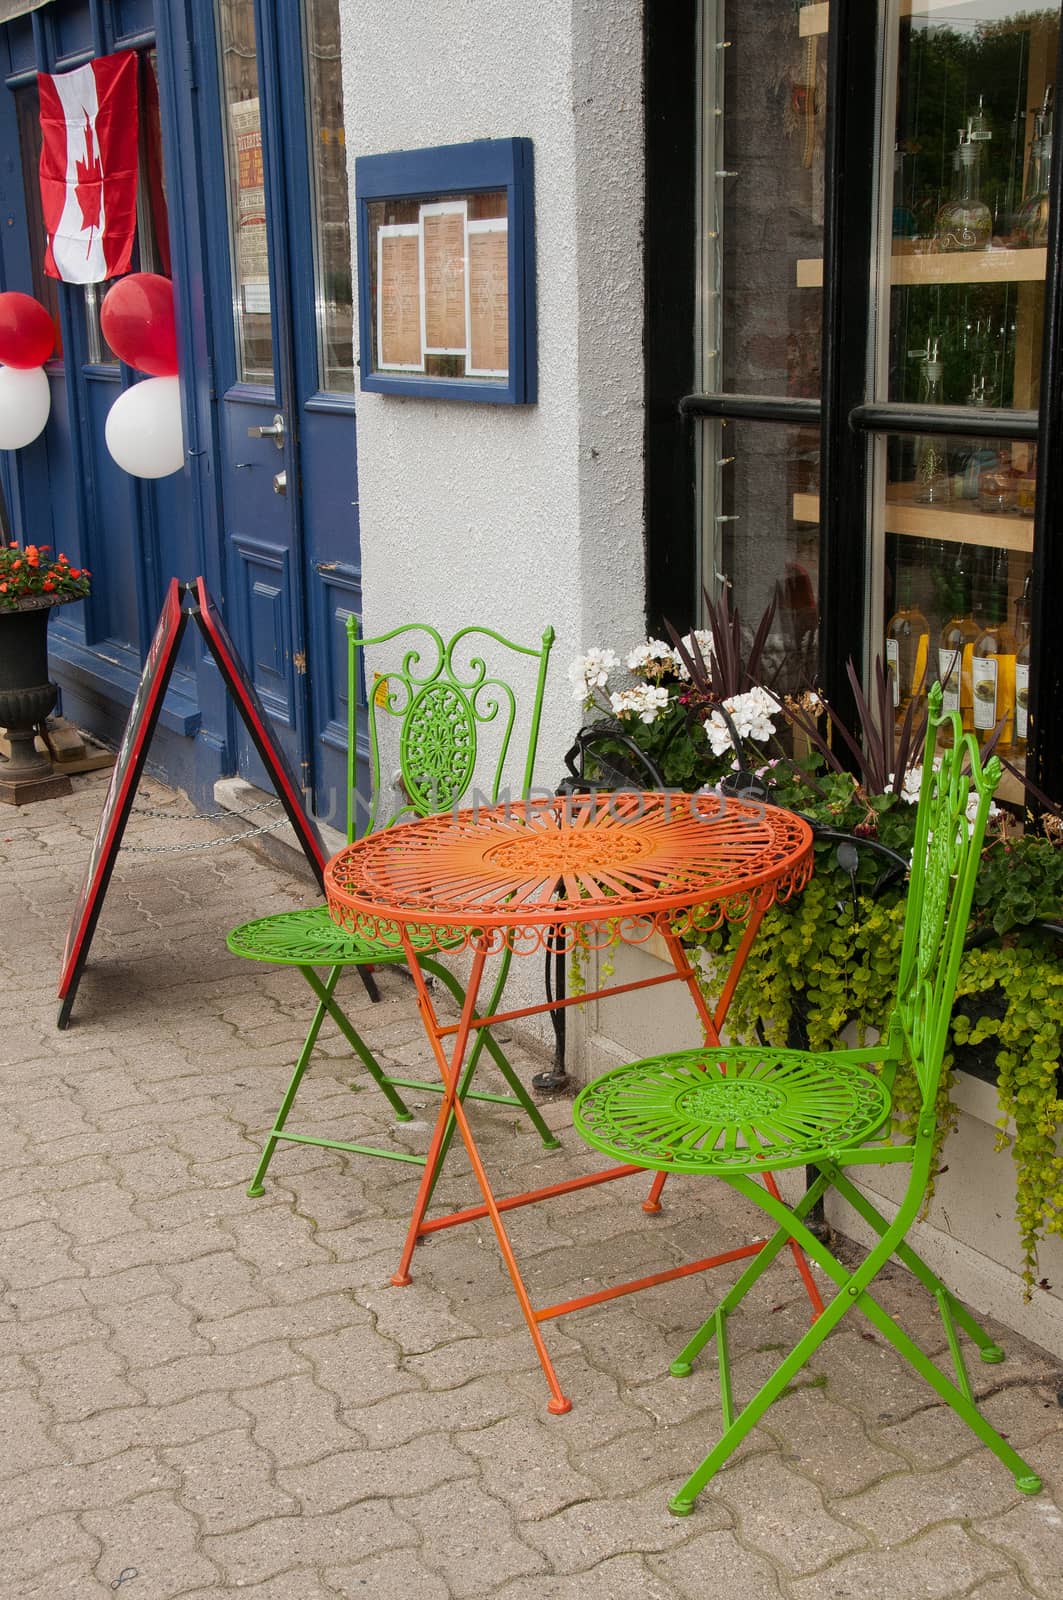 Round red metal table and a pair green metal chairs stand on the sidewalk outside the cafe